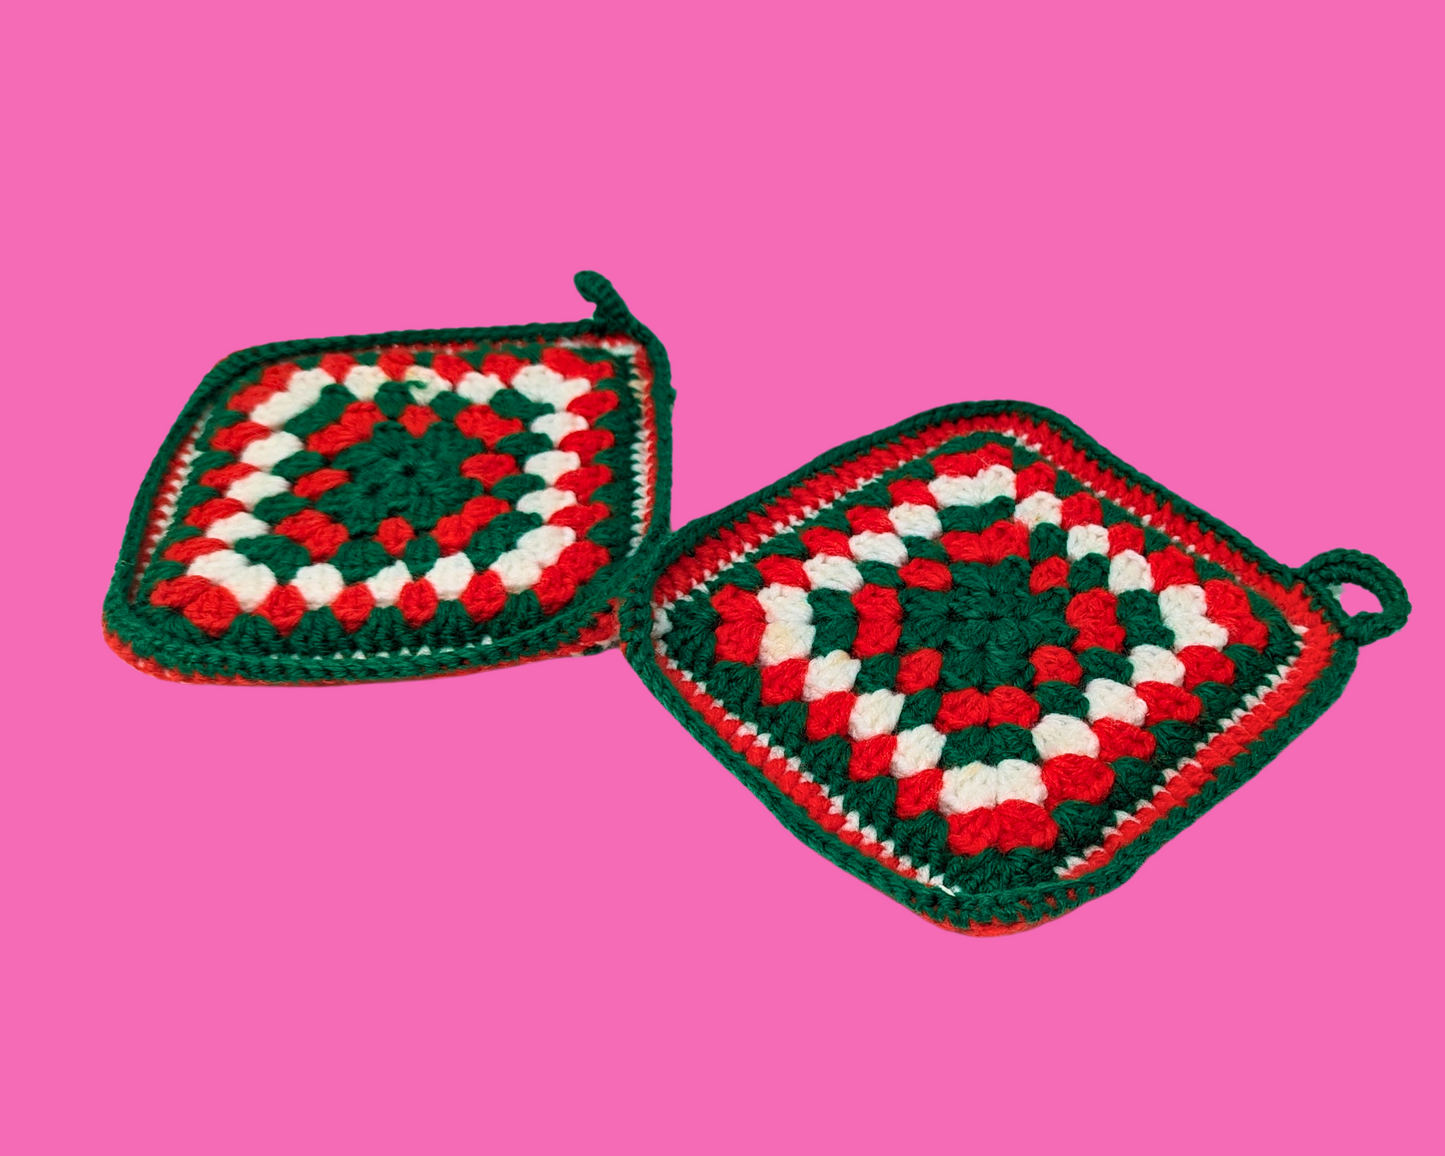 Vintage 1980's Hand Crocheted Oven Mitts